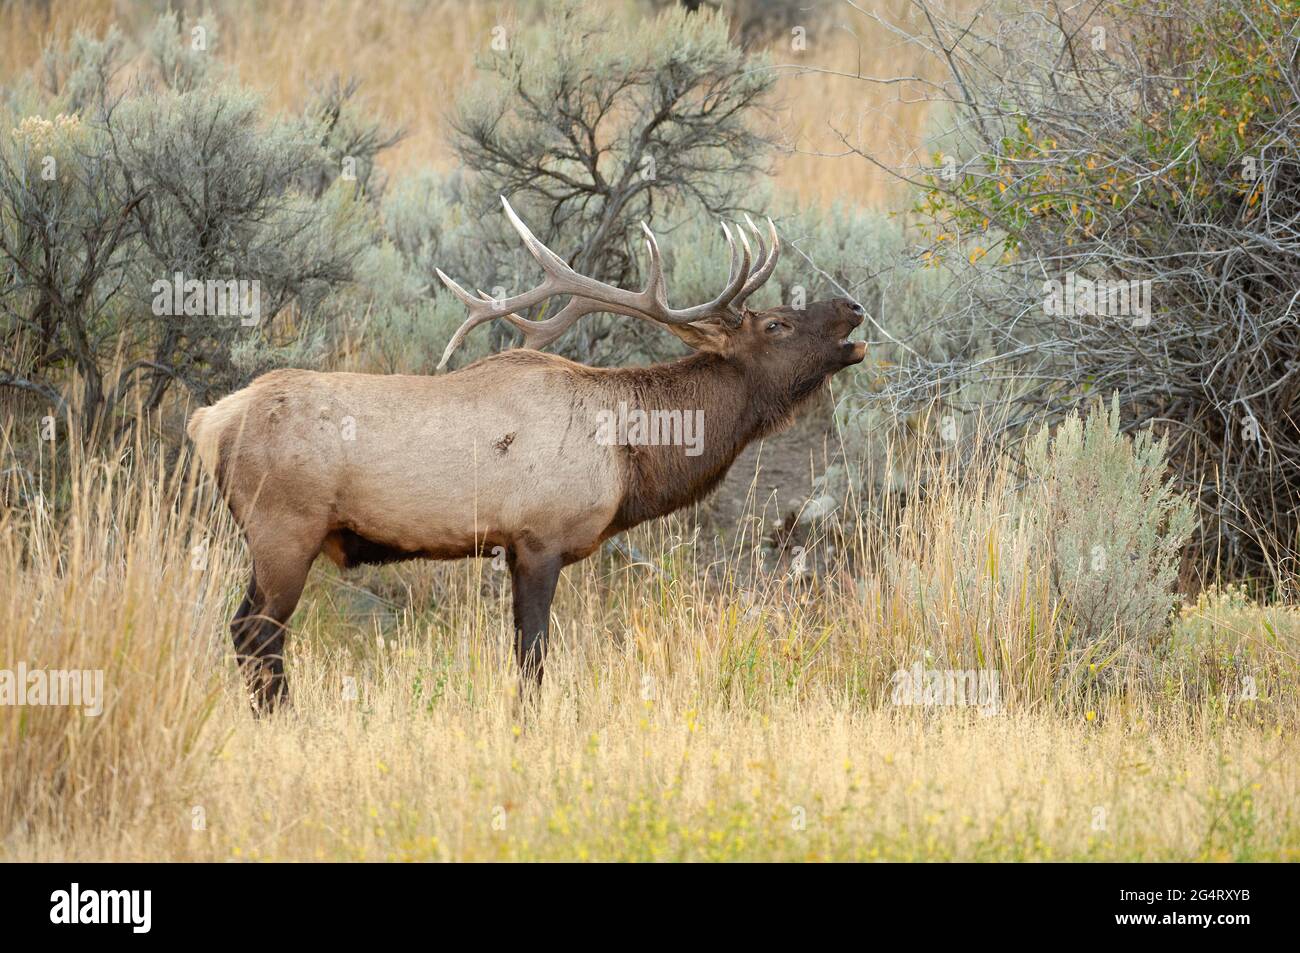 Bull Elk (Cervus canadensis) bugling during the rut. Yellowstone National Park, Wyoming, USA. Stock Photo